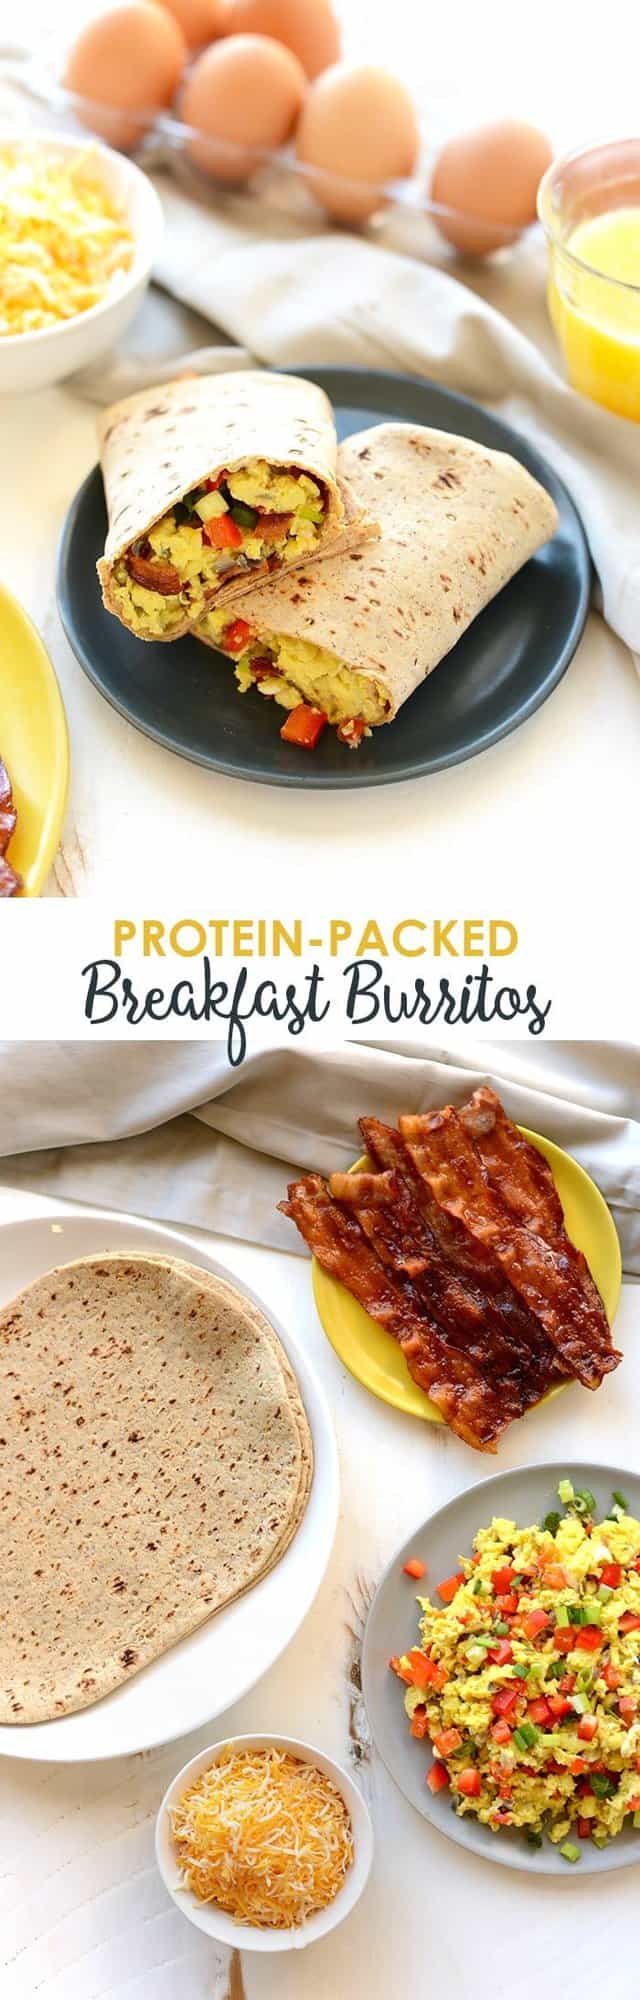 This is meal prep at its finest! Make these delicious protein-packed breakfast burritos to have before work or school all week long!